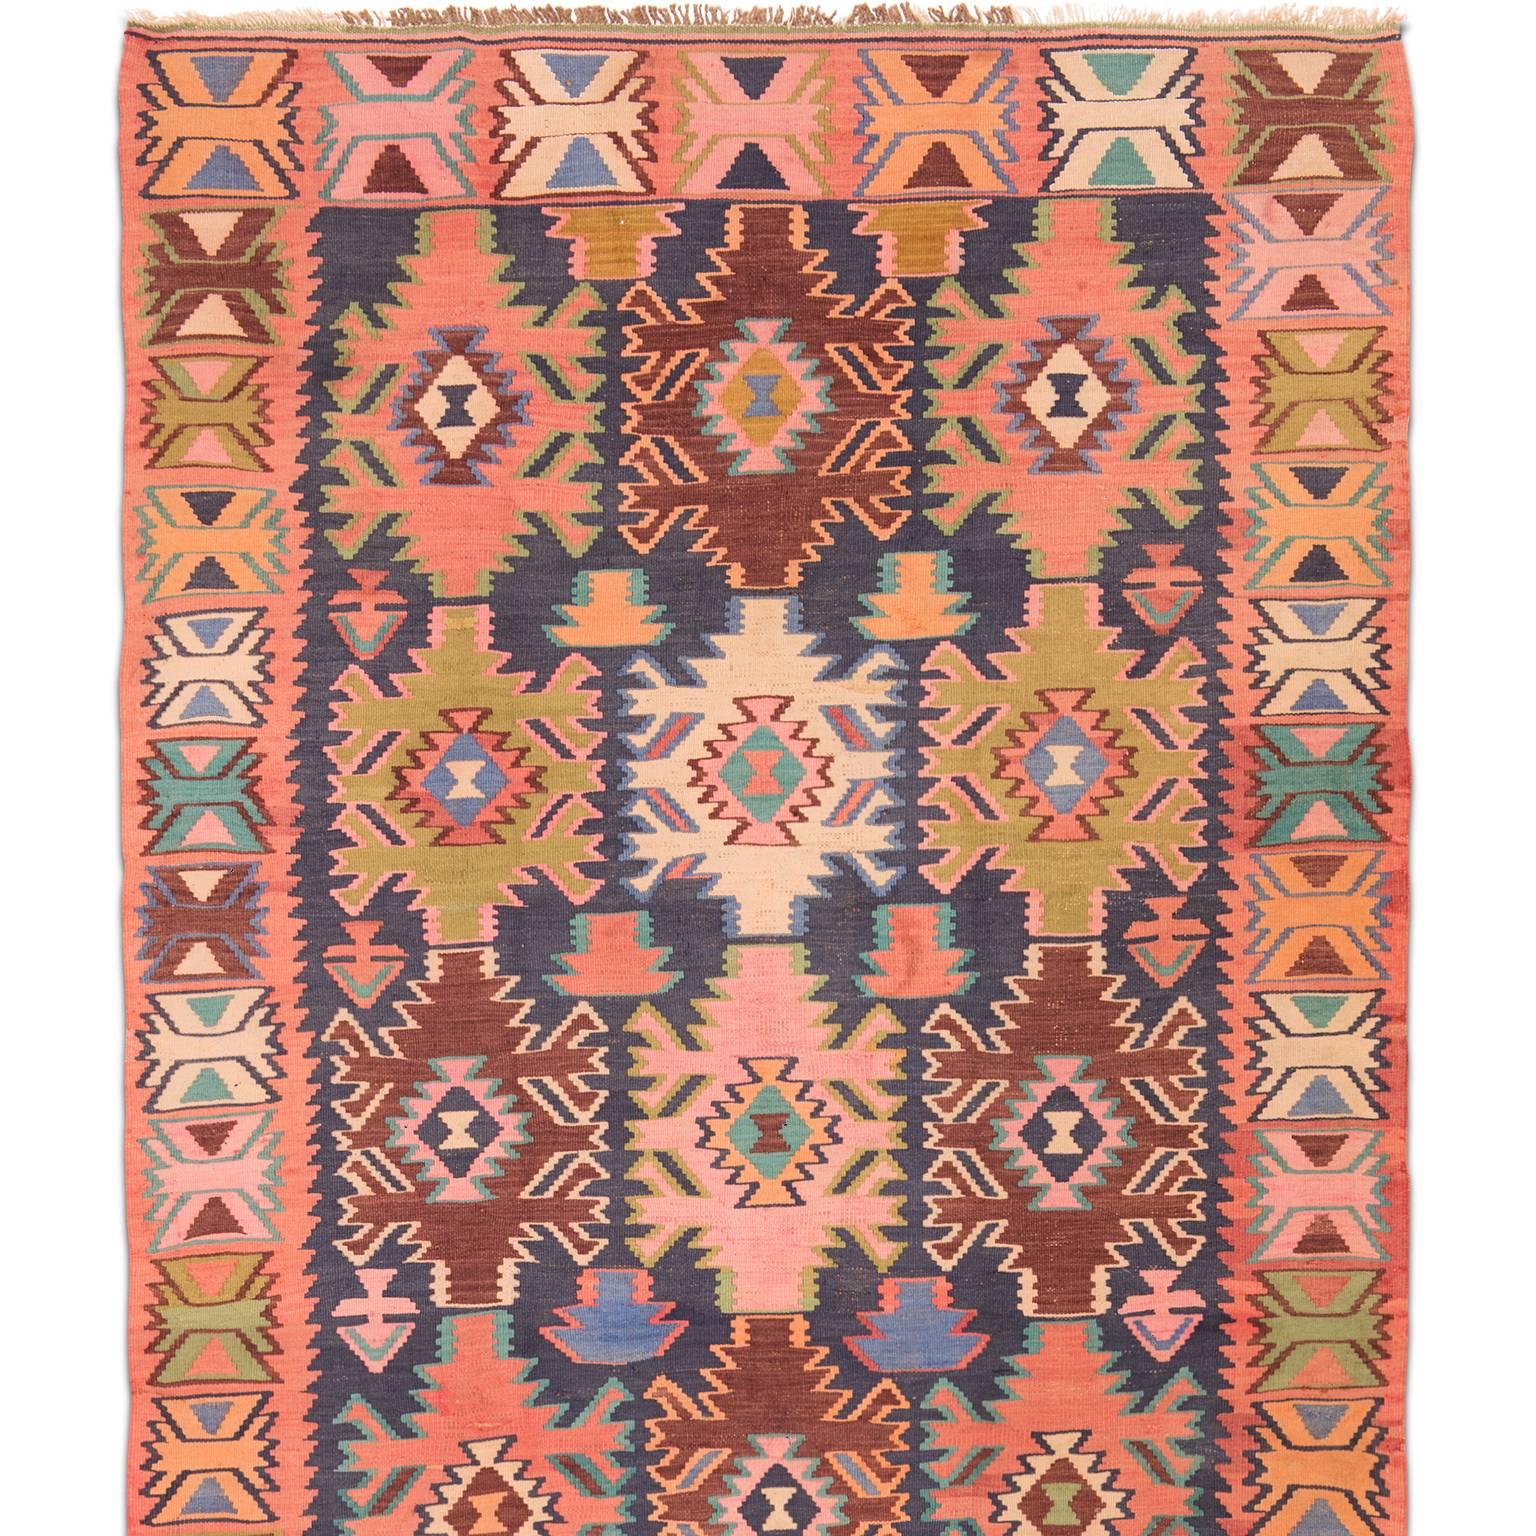 This antique Avar Kilim was woven in the Dagestan area of the east Caucasus in the early 20th century, circa 1920. Woven in an array of exceptionally colored wools the design is sometimes referred to as the 'racing car' pattern.